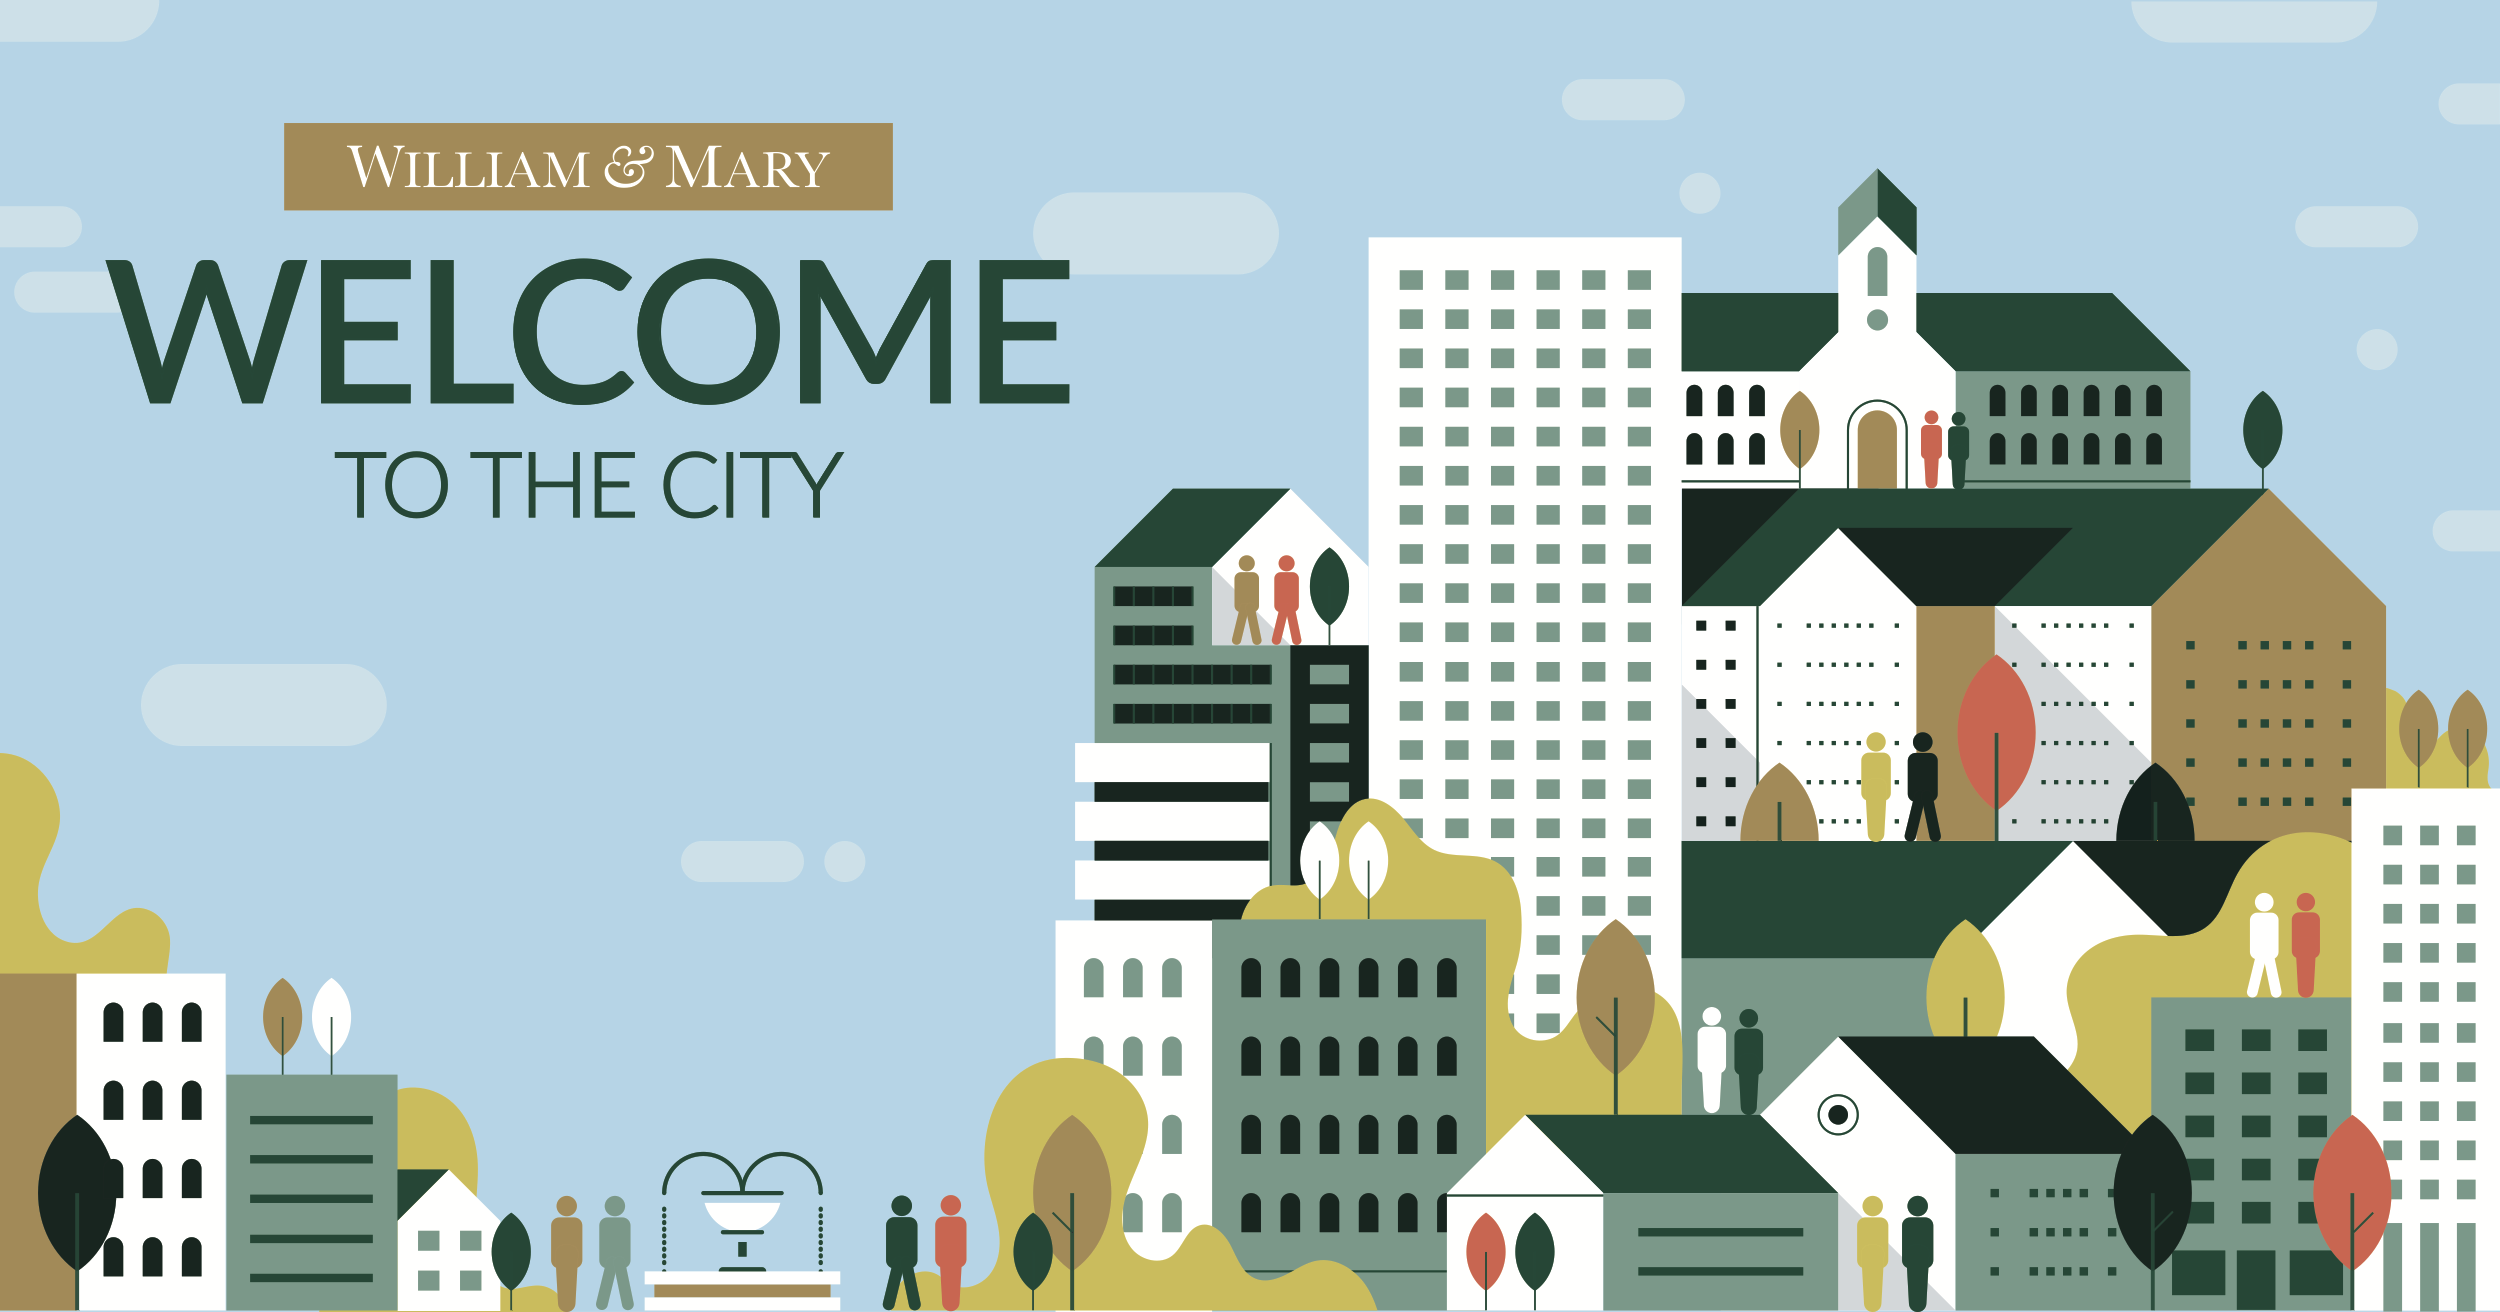 welcome-to-the-city-1200x630-final-1.png